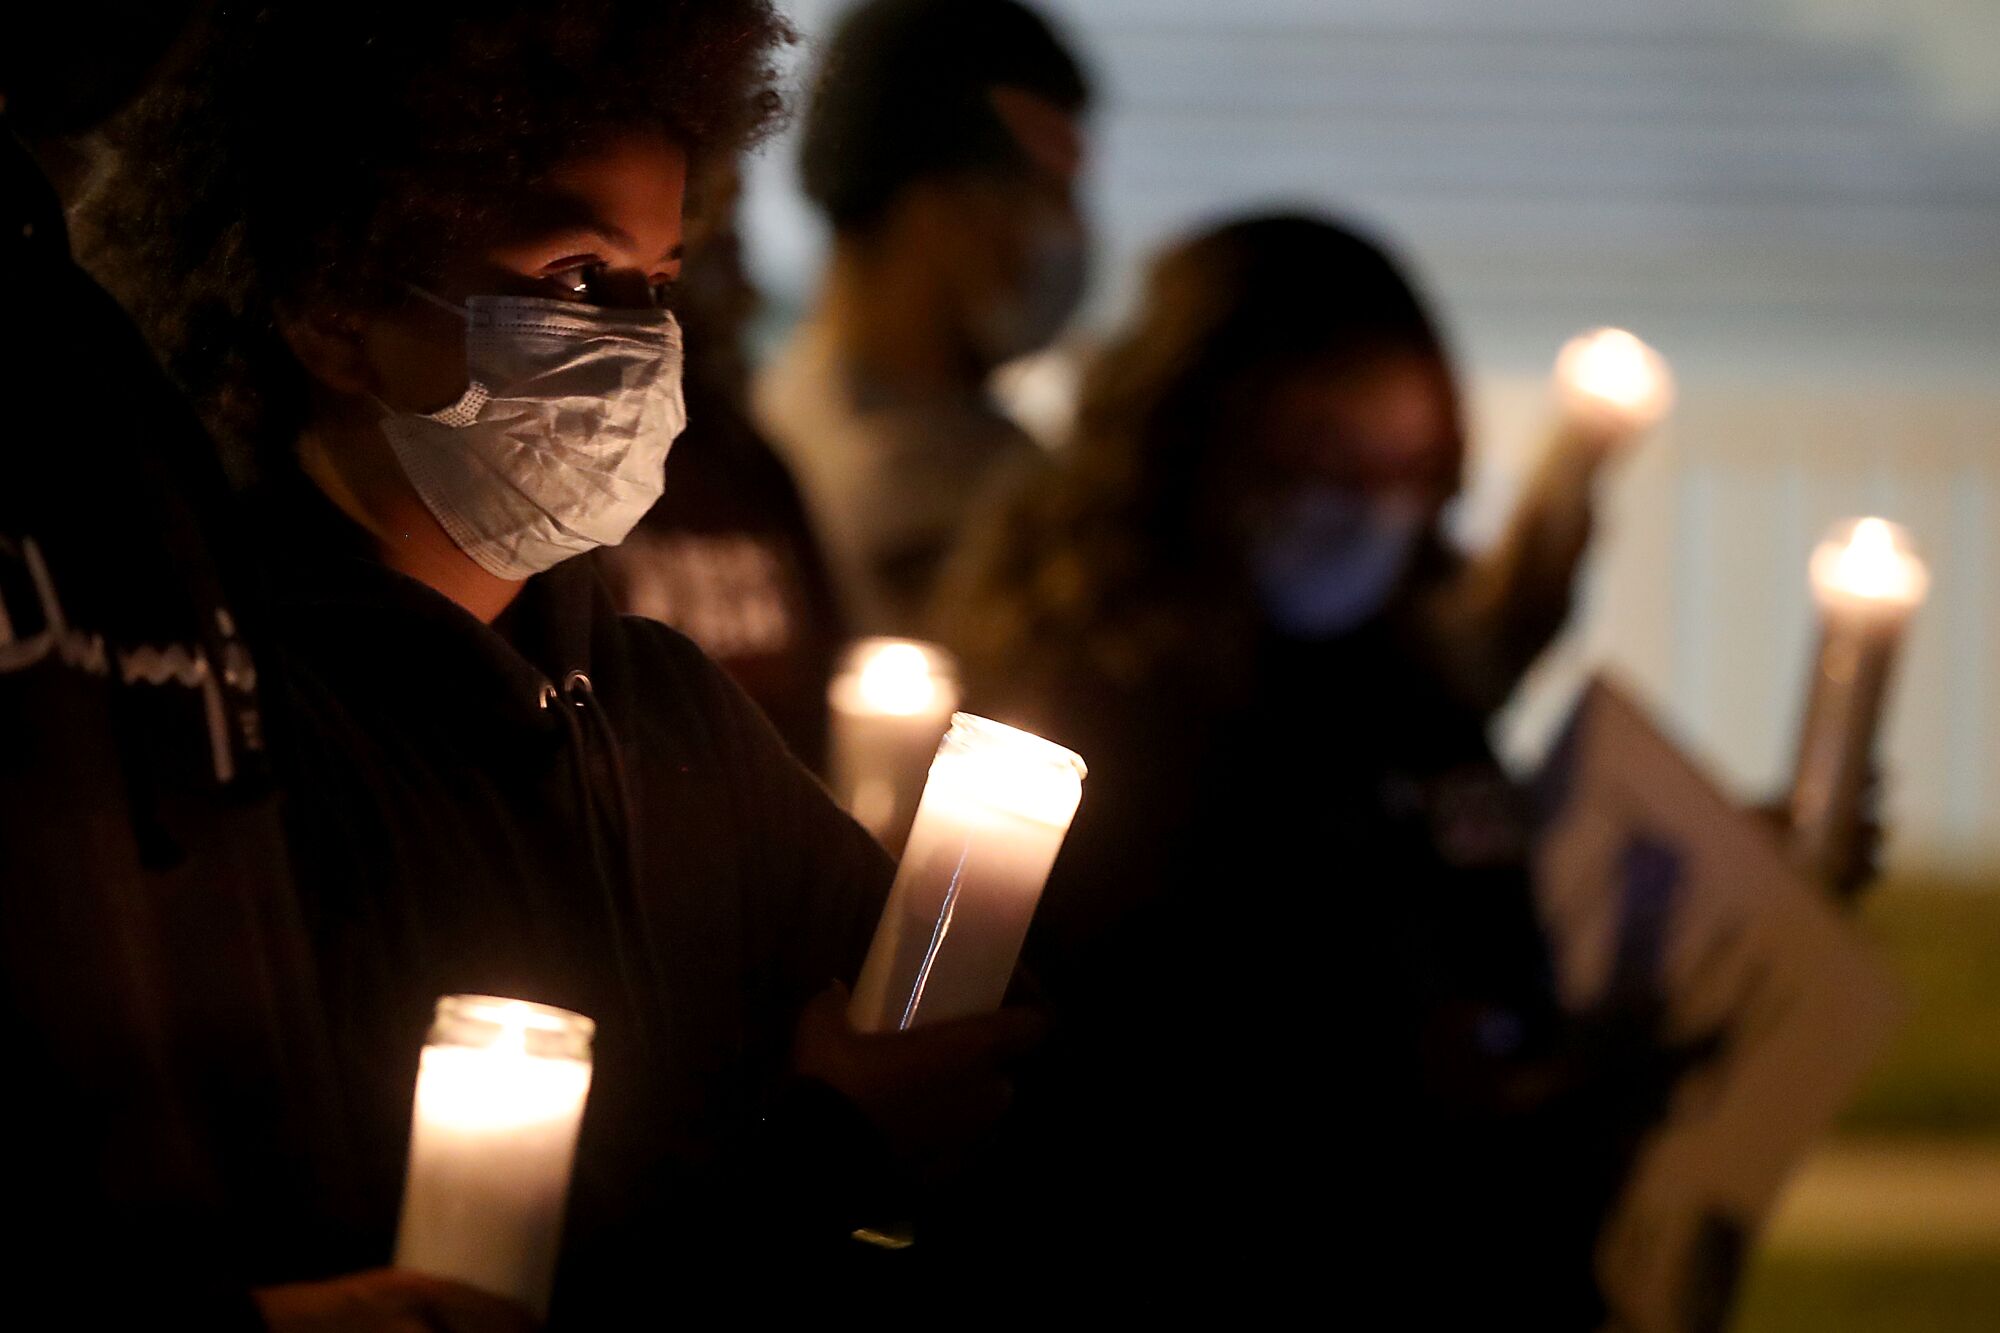 People in masks hold candles at a vigil